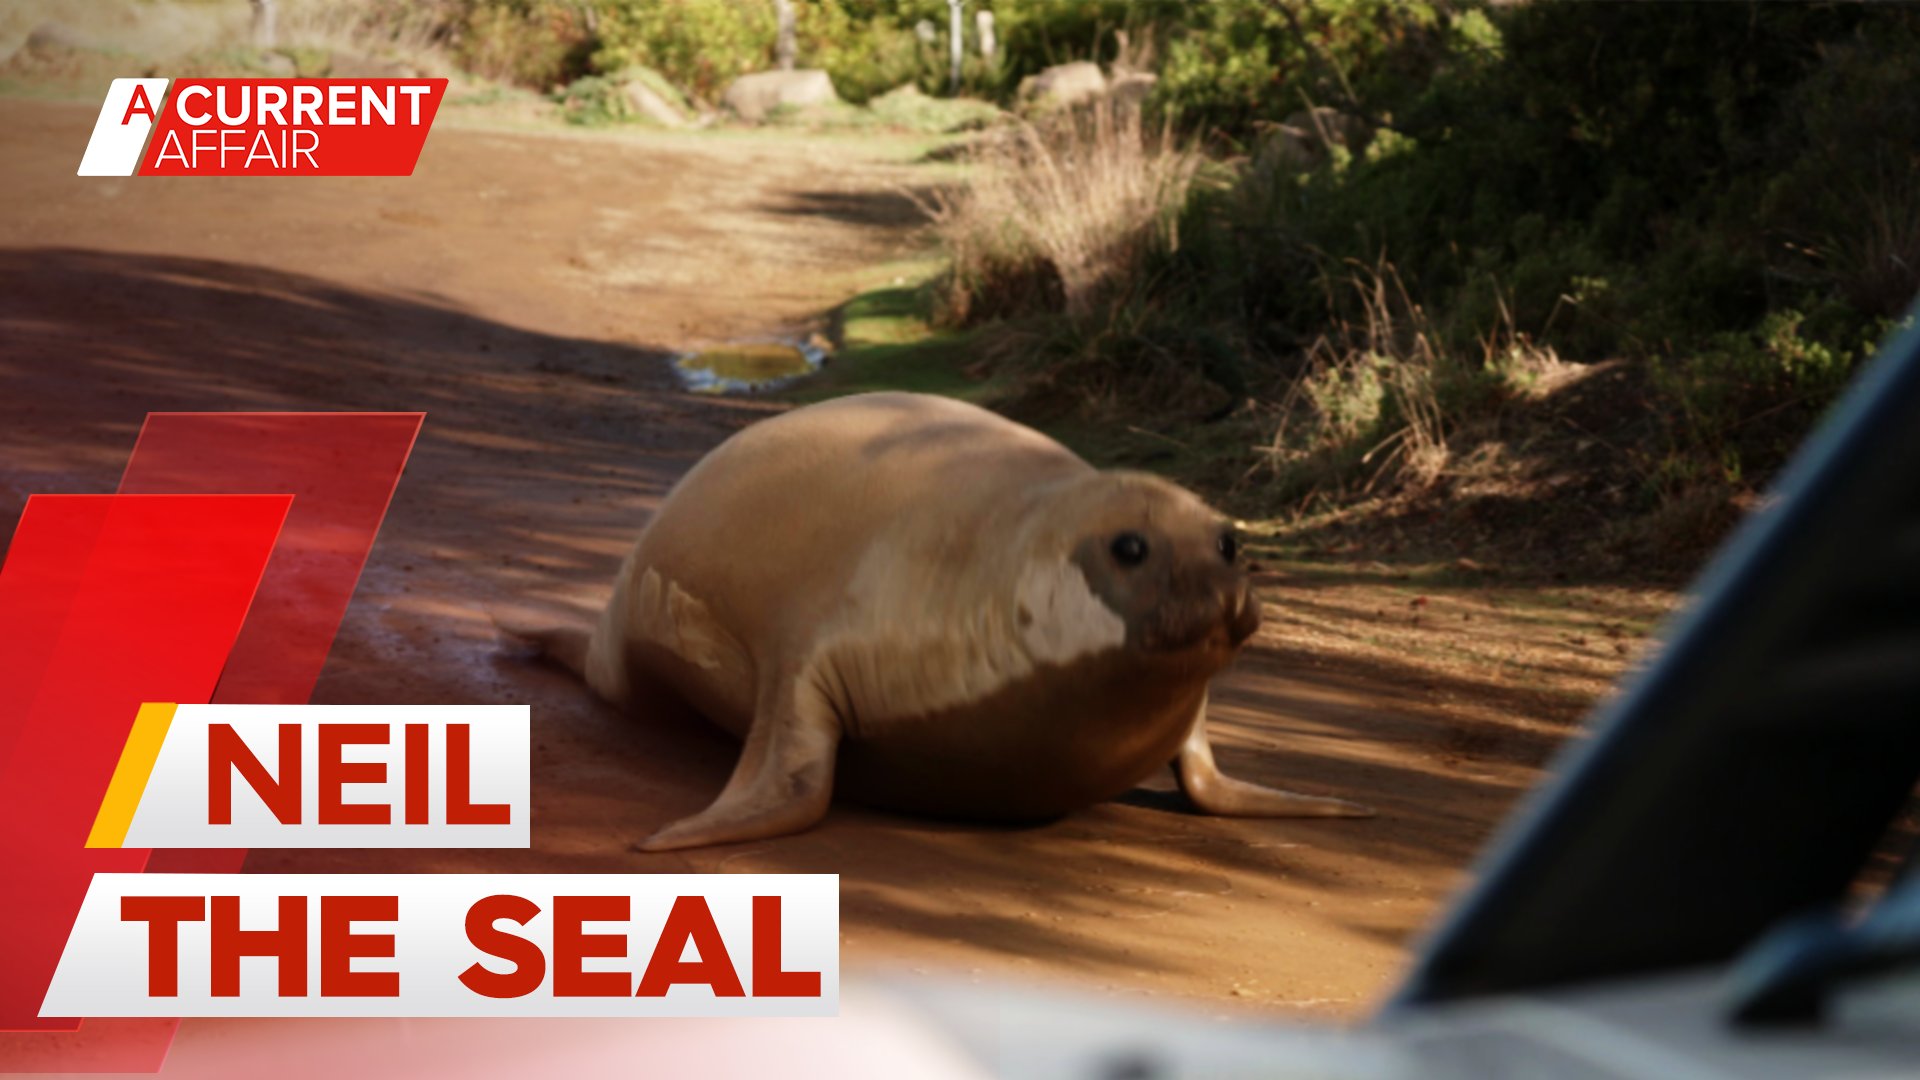 Conservationists relocate famous seal so fans don't 'love him to death'